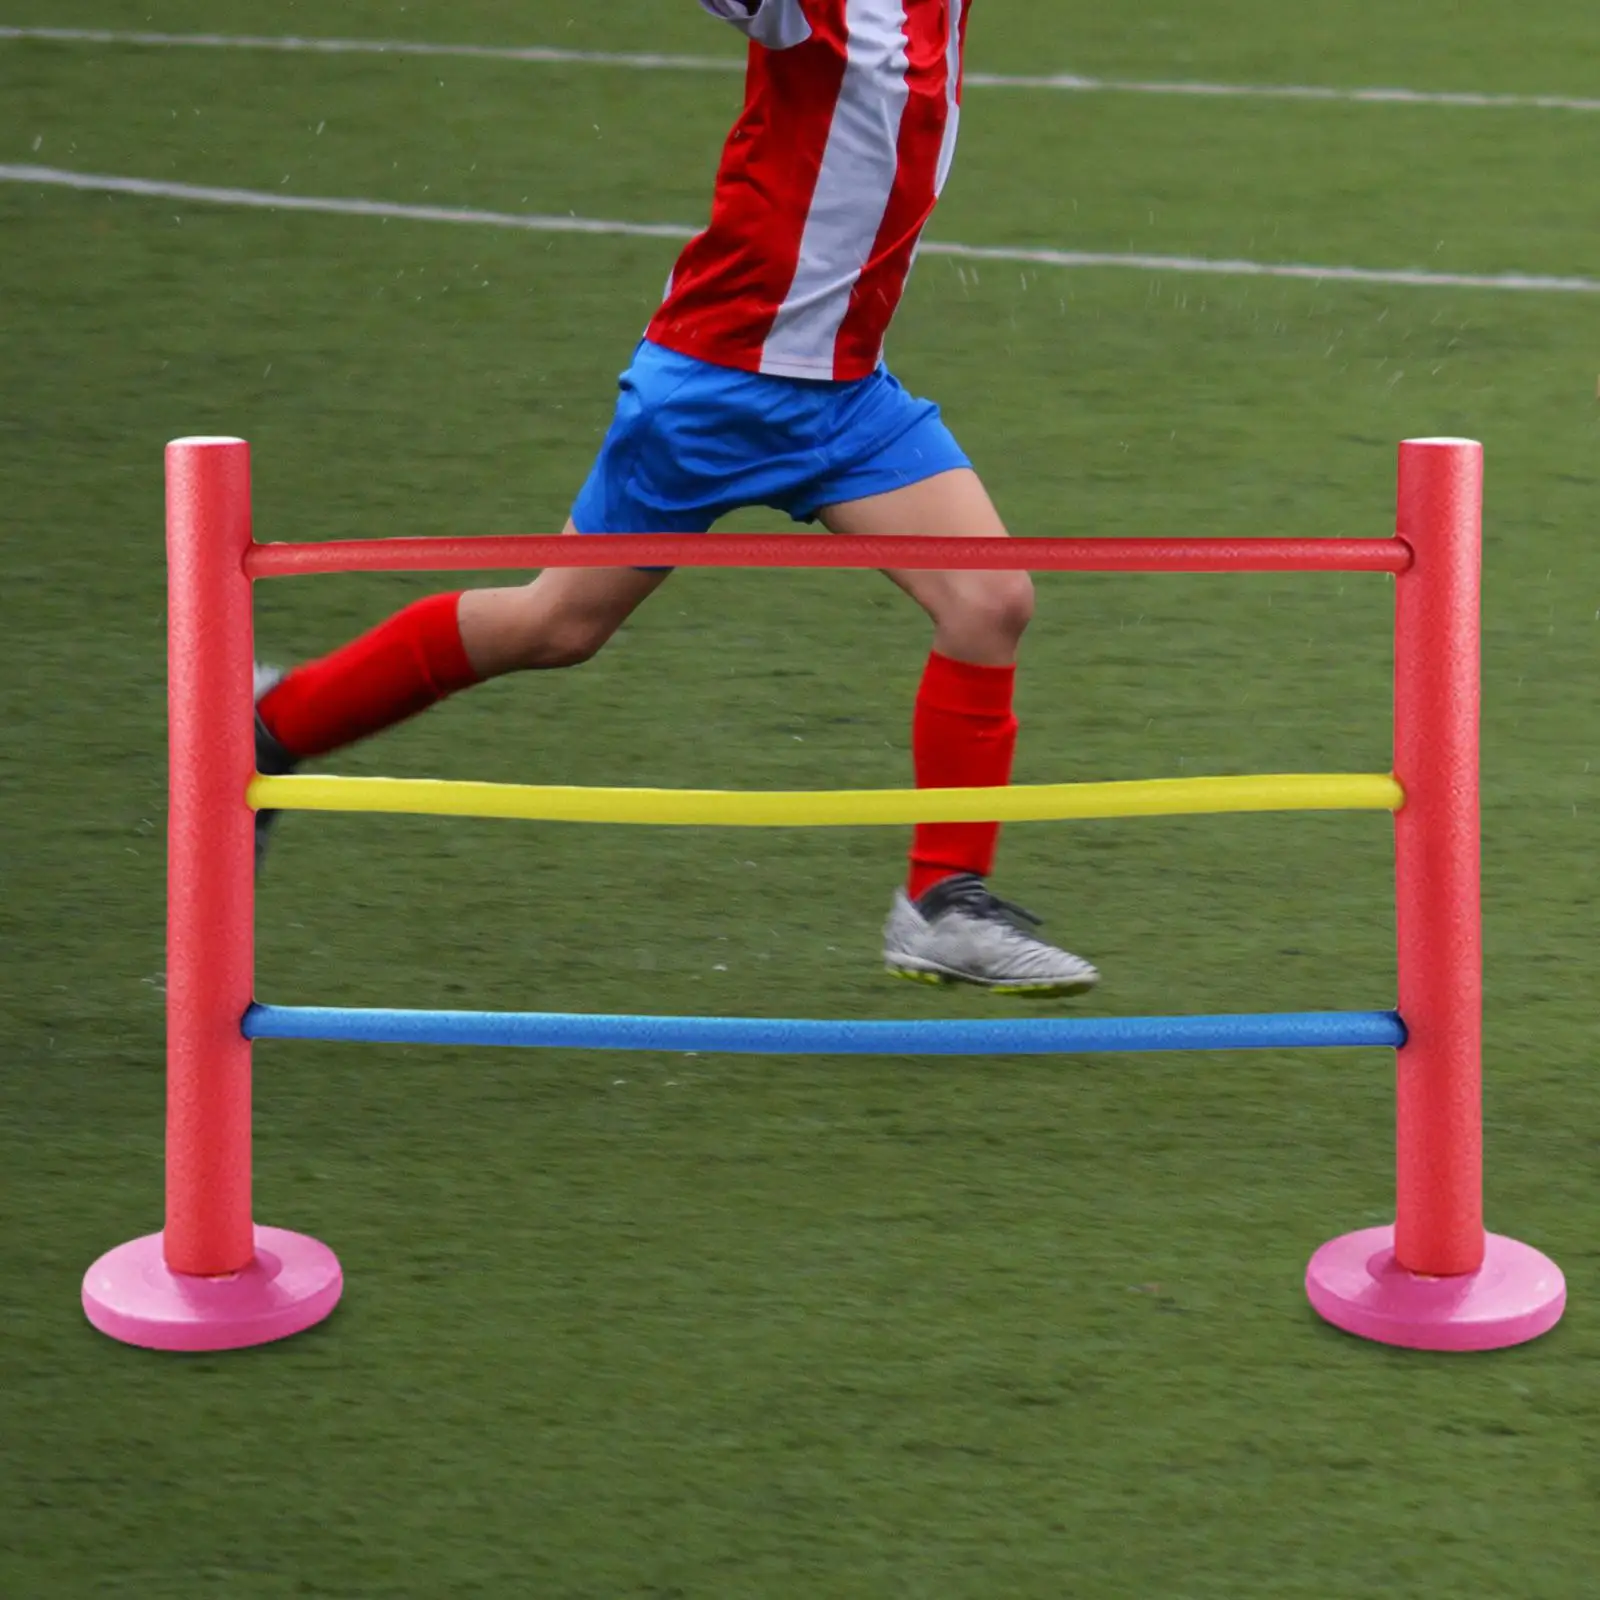 

Agility Training Hurdles for Kids Educational Toy Soccer Exercise Football Improves Strength Coordination Speed Training Hurdle